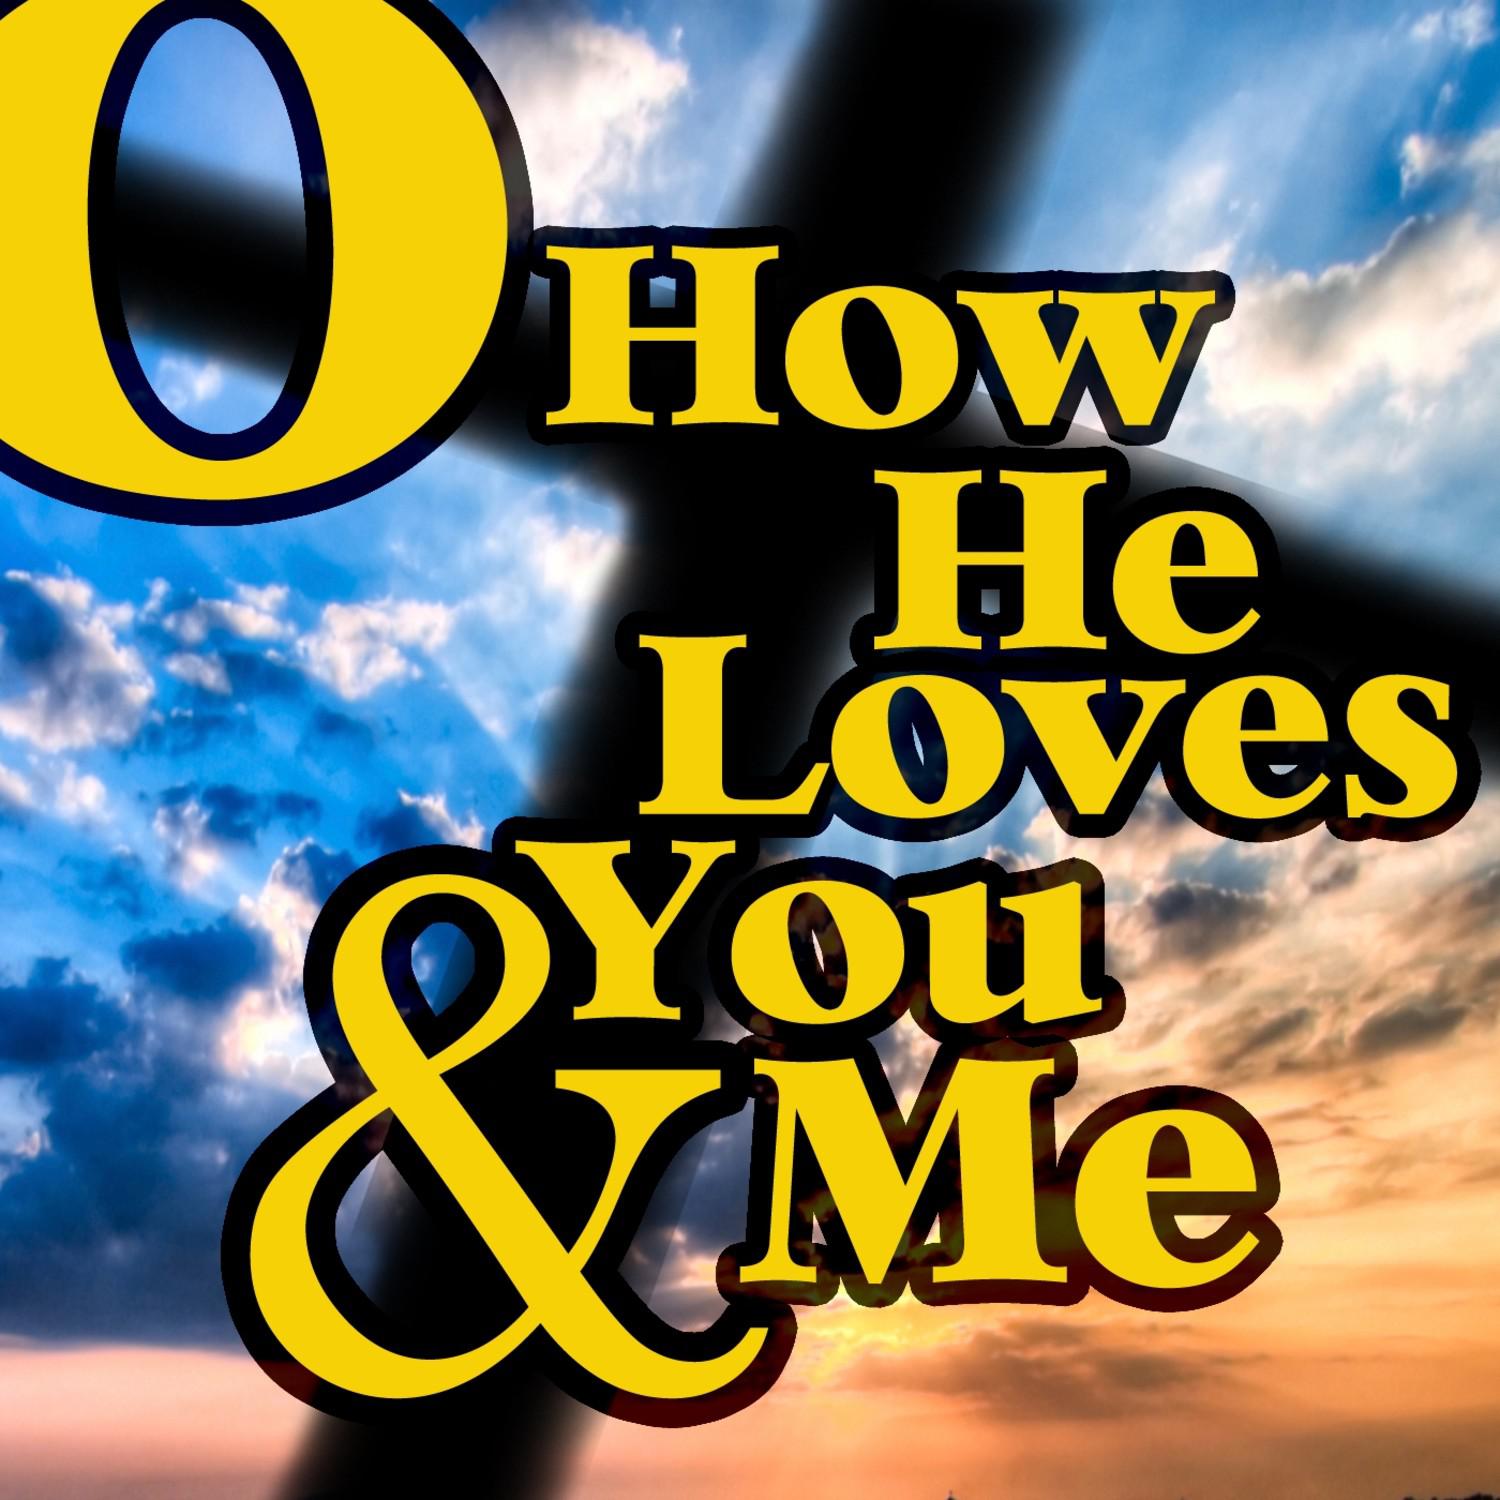 O How He Loves You and Me